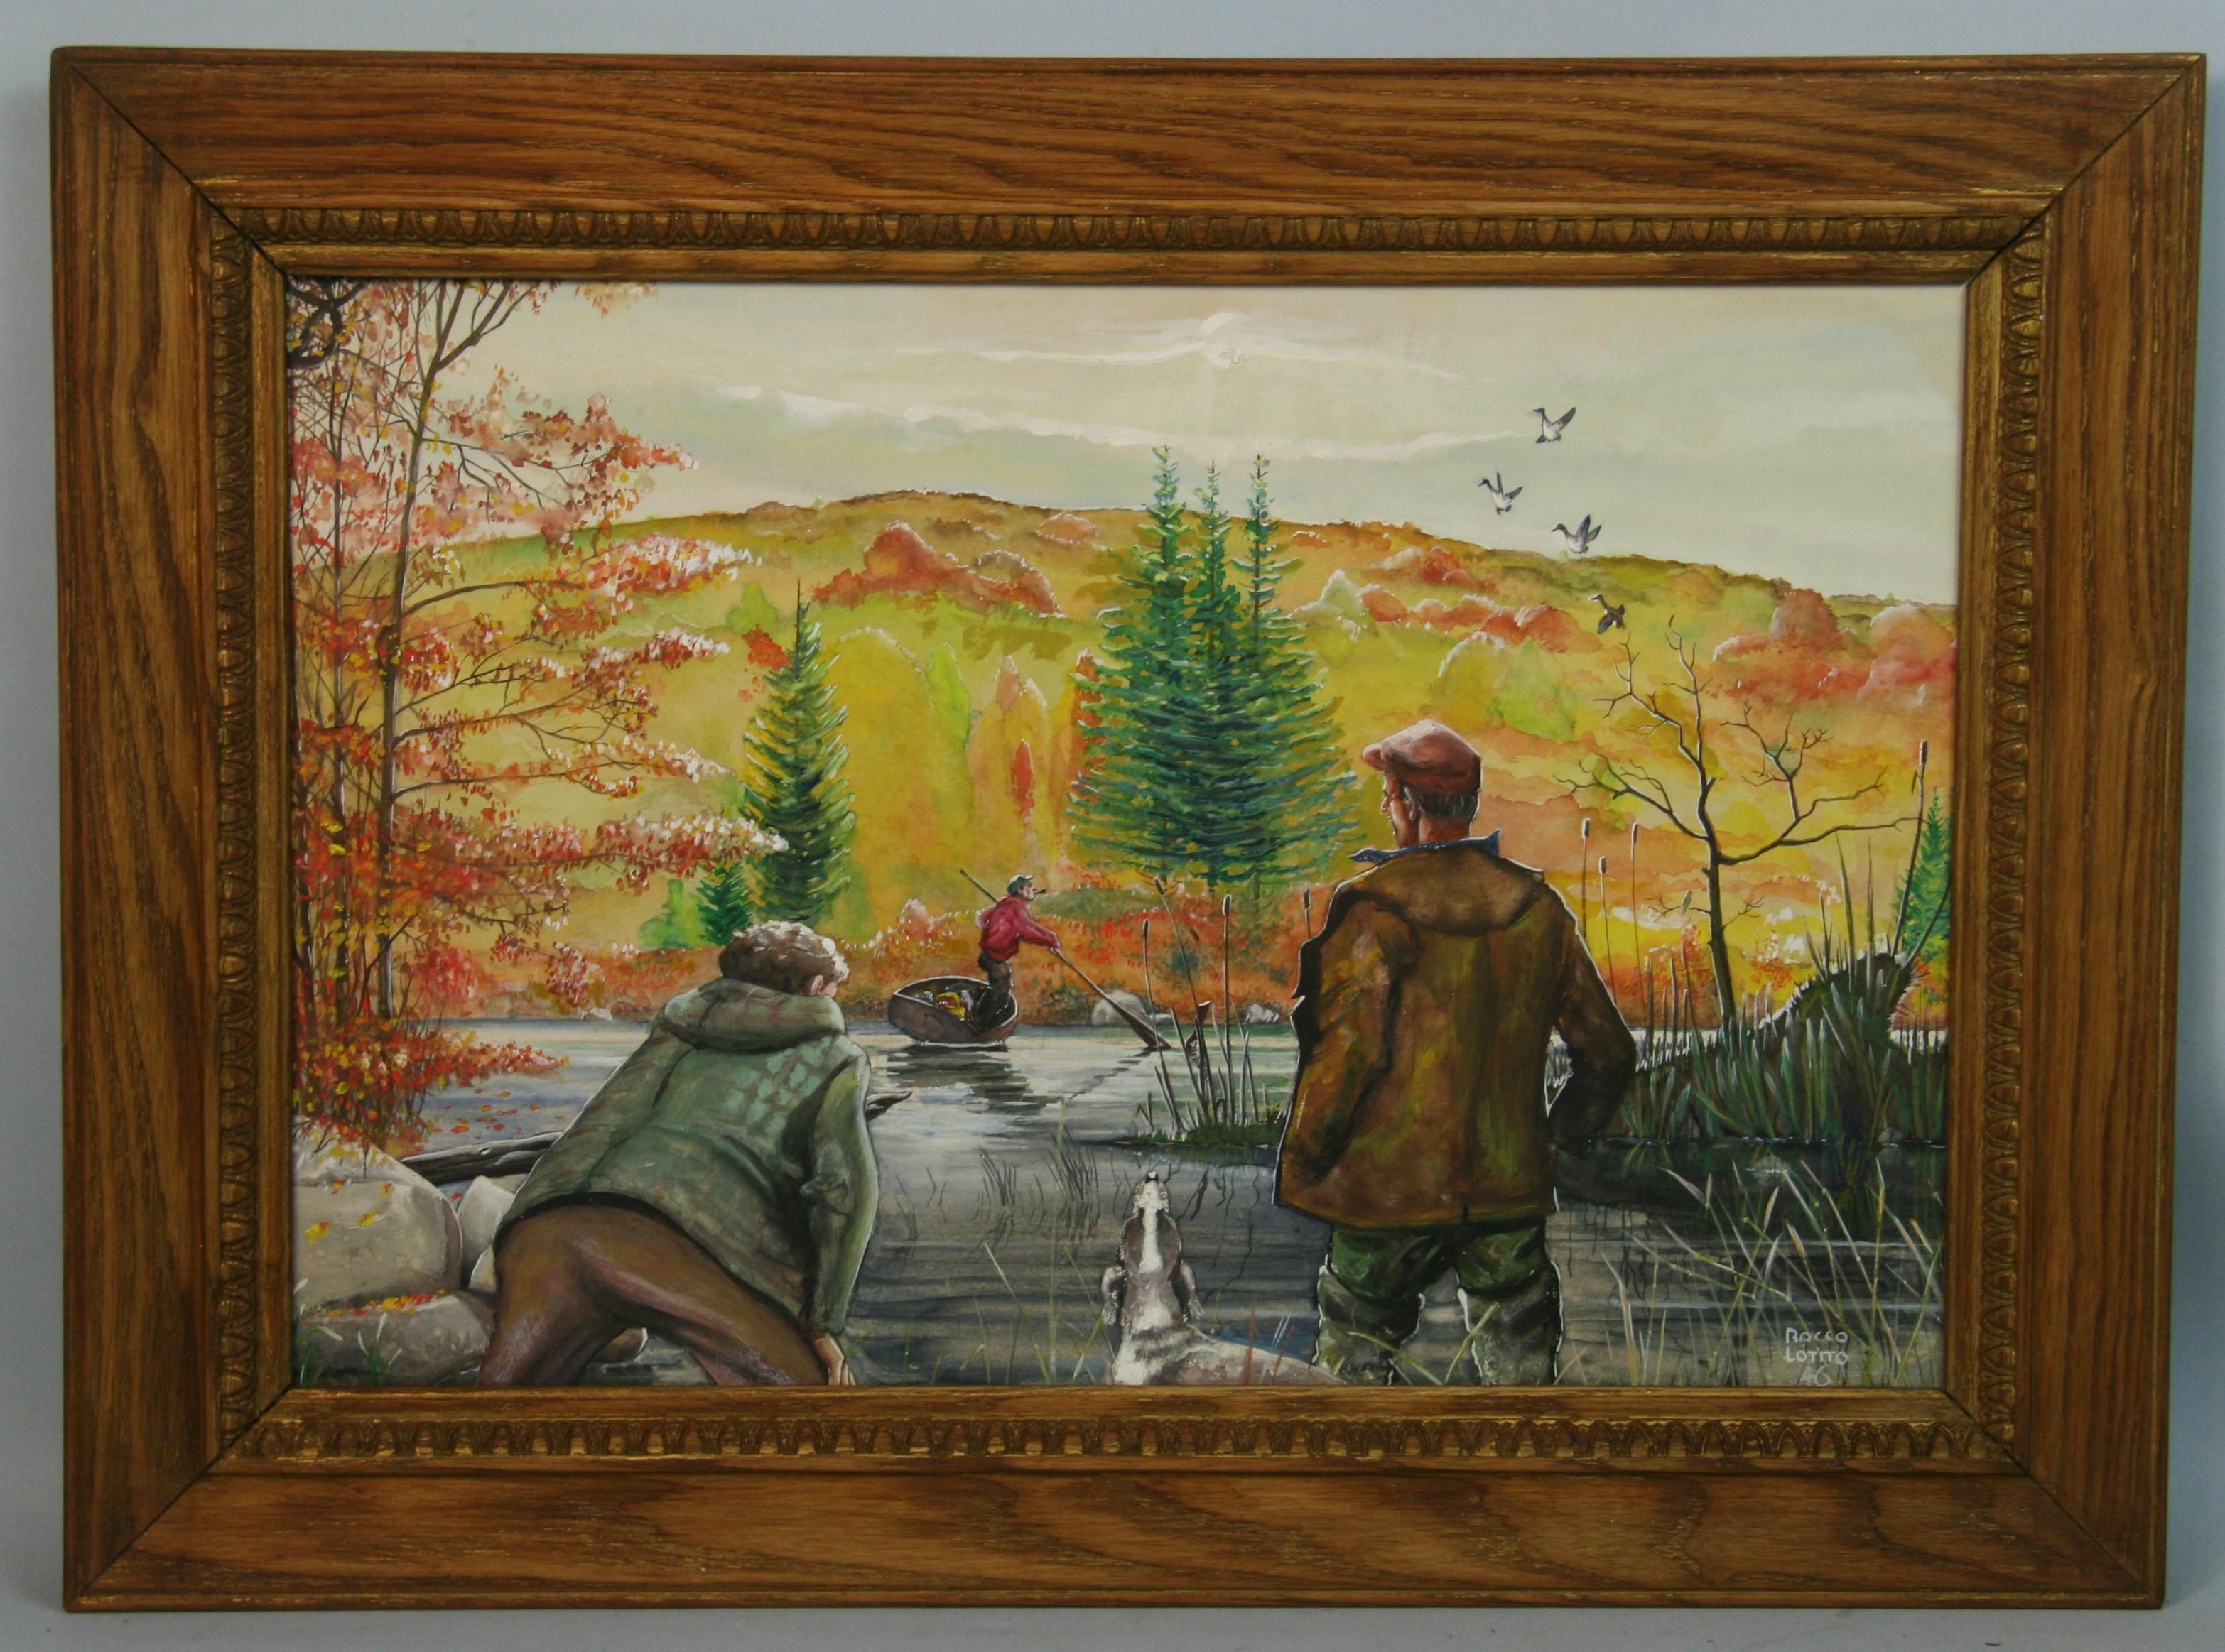 5041 Duck hunt painting
Set in a 19th century solid oak frame
Rigned Rocco Lotto 46